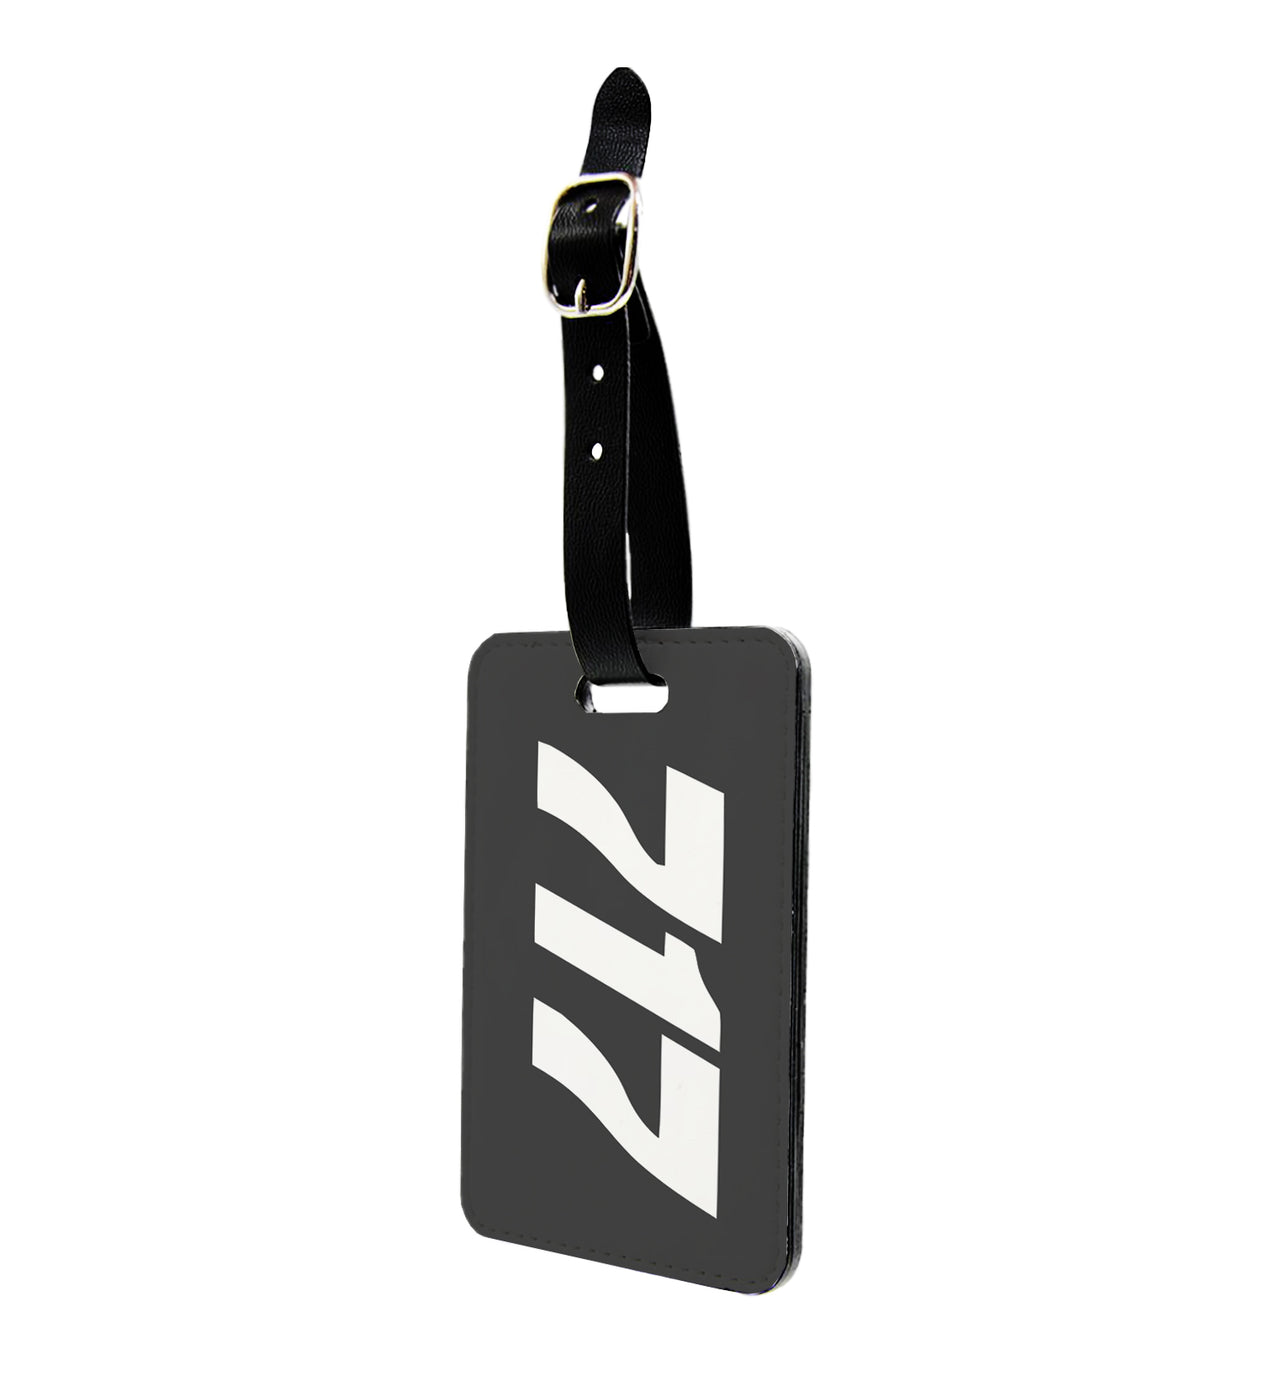 Boeing 717 Text Designed Luggage Tag